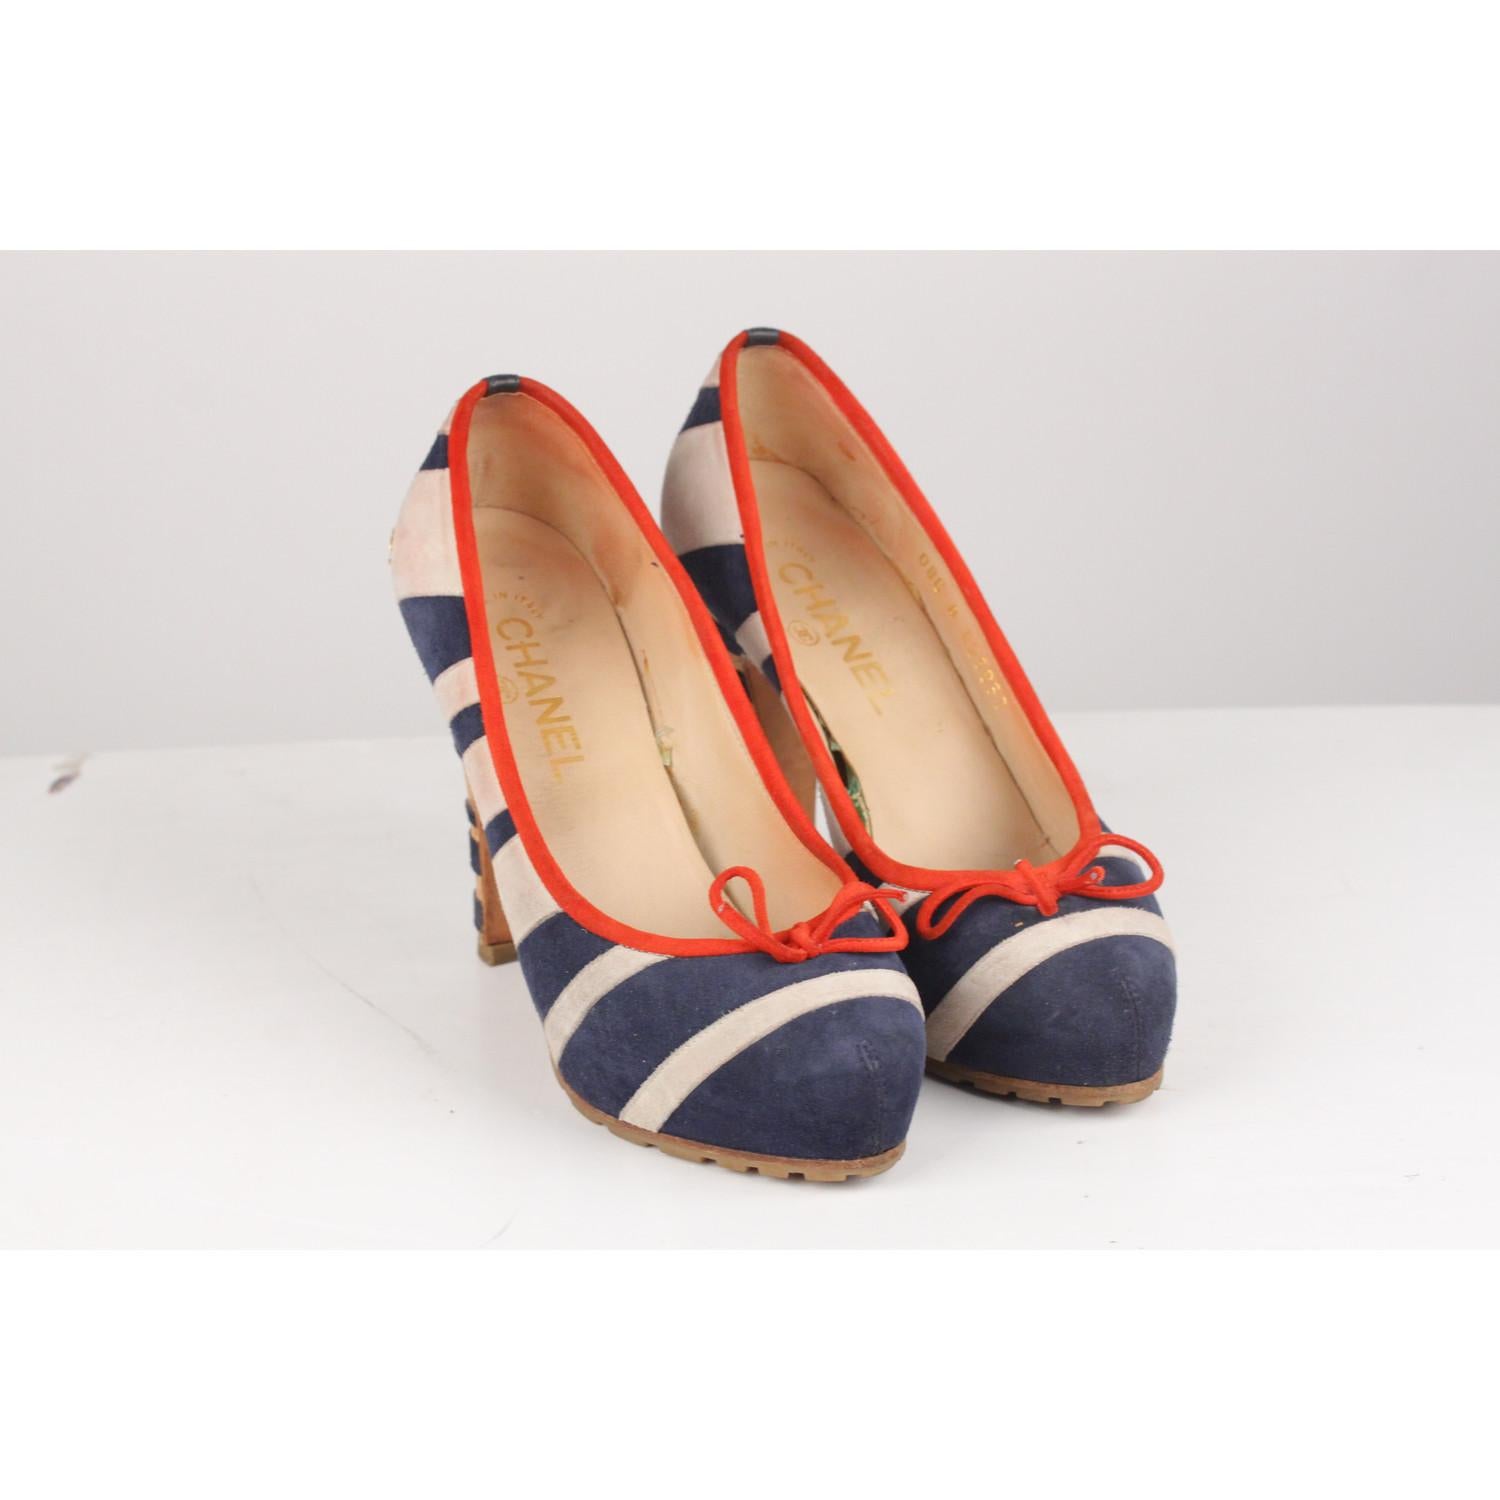 - CHANEL Suede Striped Pumps in Navy, White and red colors 
- Gold CC logo embellishment on the heel
- Red suede leather piping  and bow on  the toe
- Cork heels with Navy blue suede leather stripes
- Heels height: 4.5 inches - 11,5 cm 
- Rubber